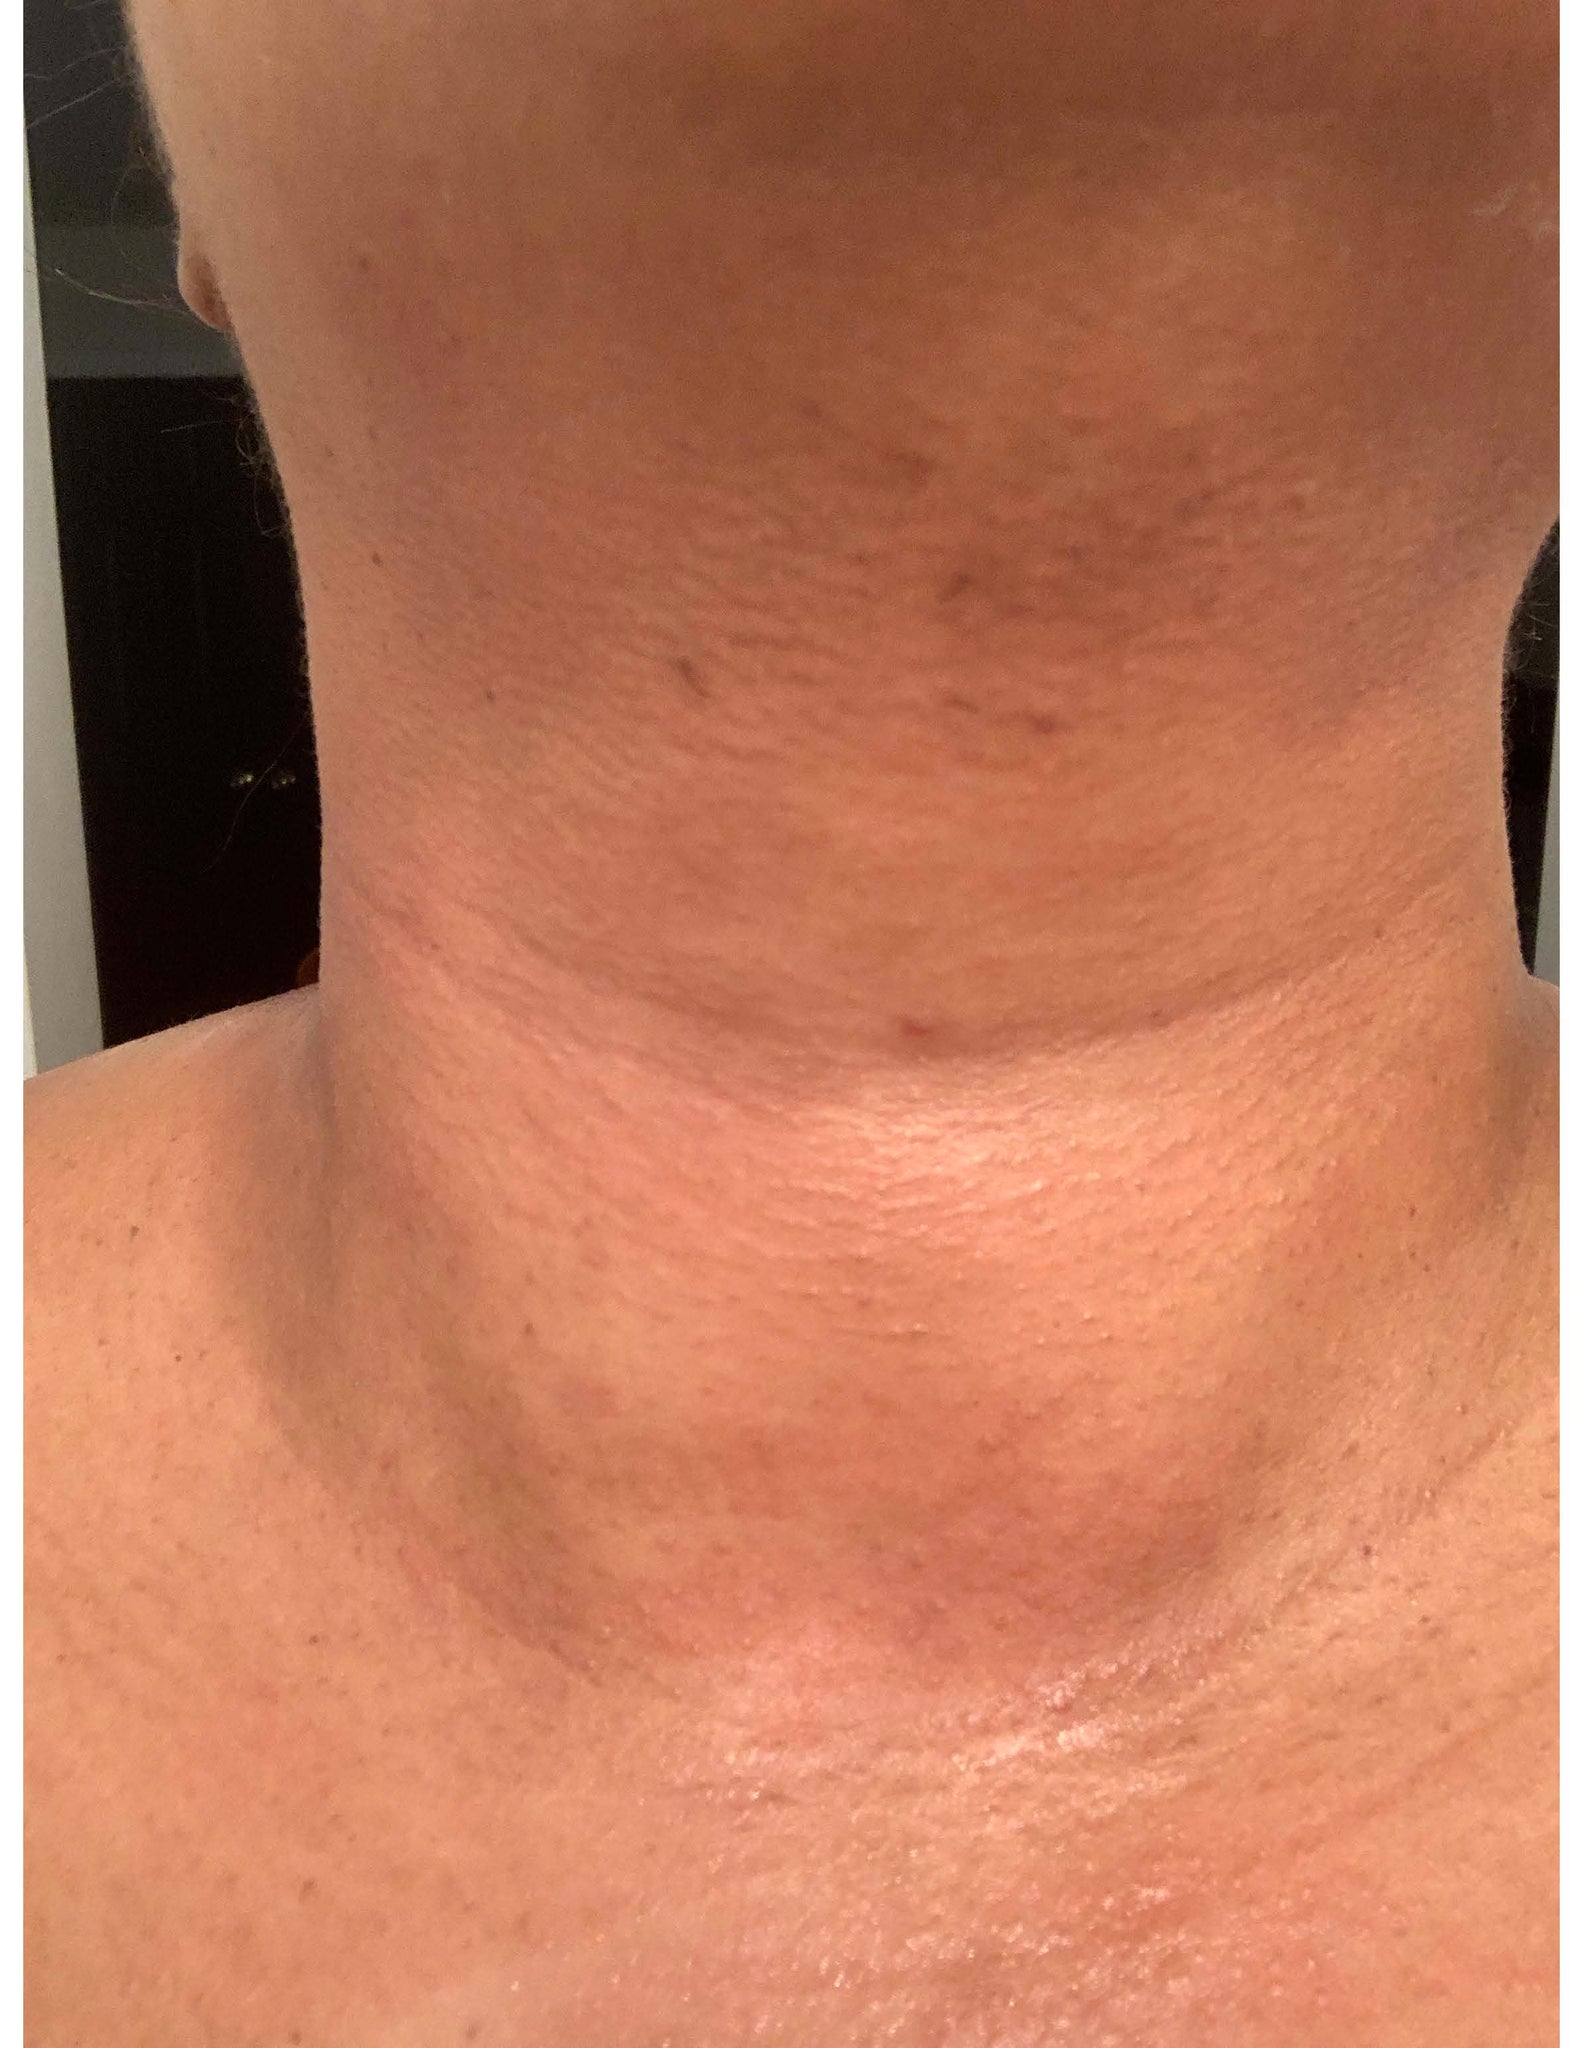 My neck during the breakout. Dark patches, itchy skin.